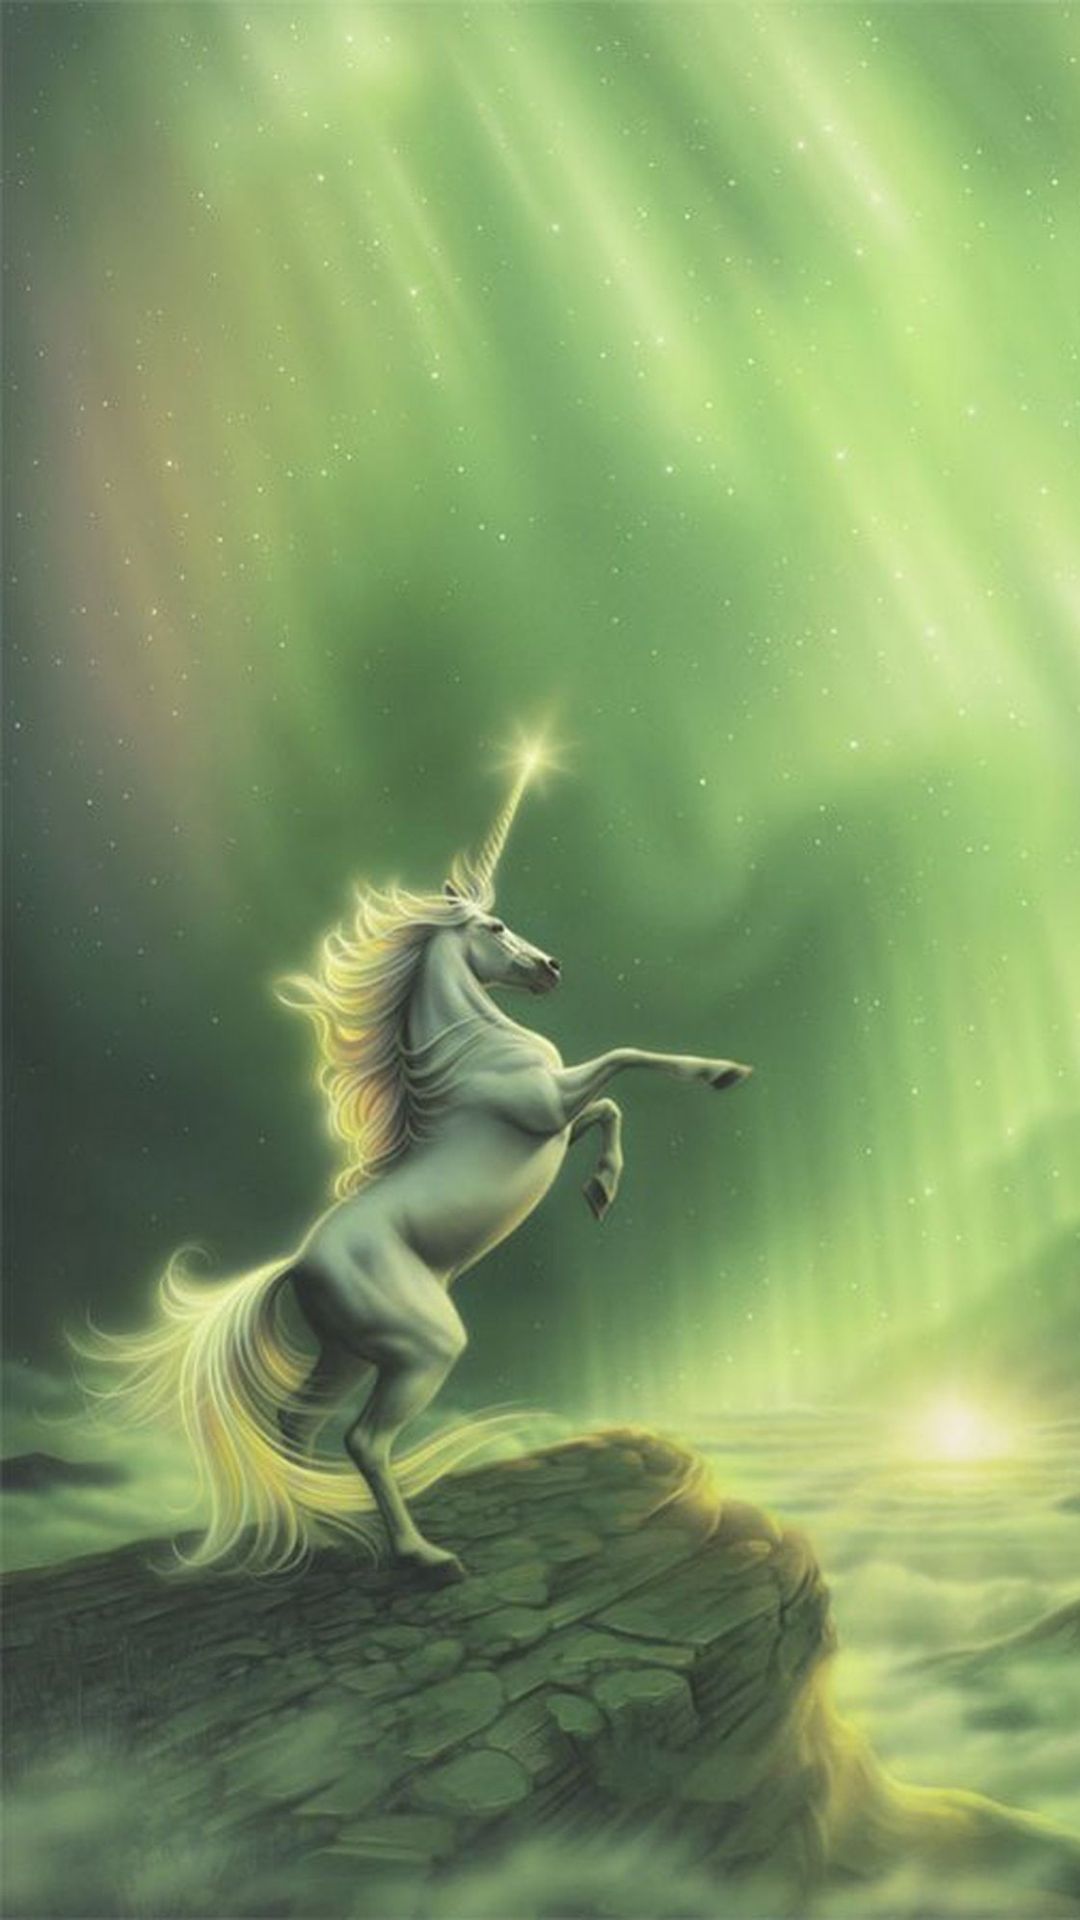 Wallpaper Unicorn Pictures Wallpapers